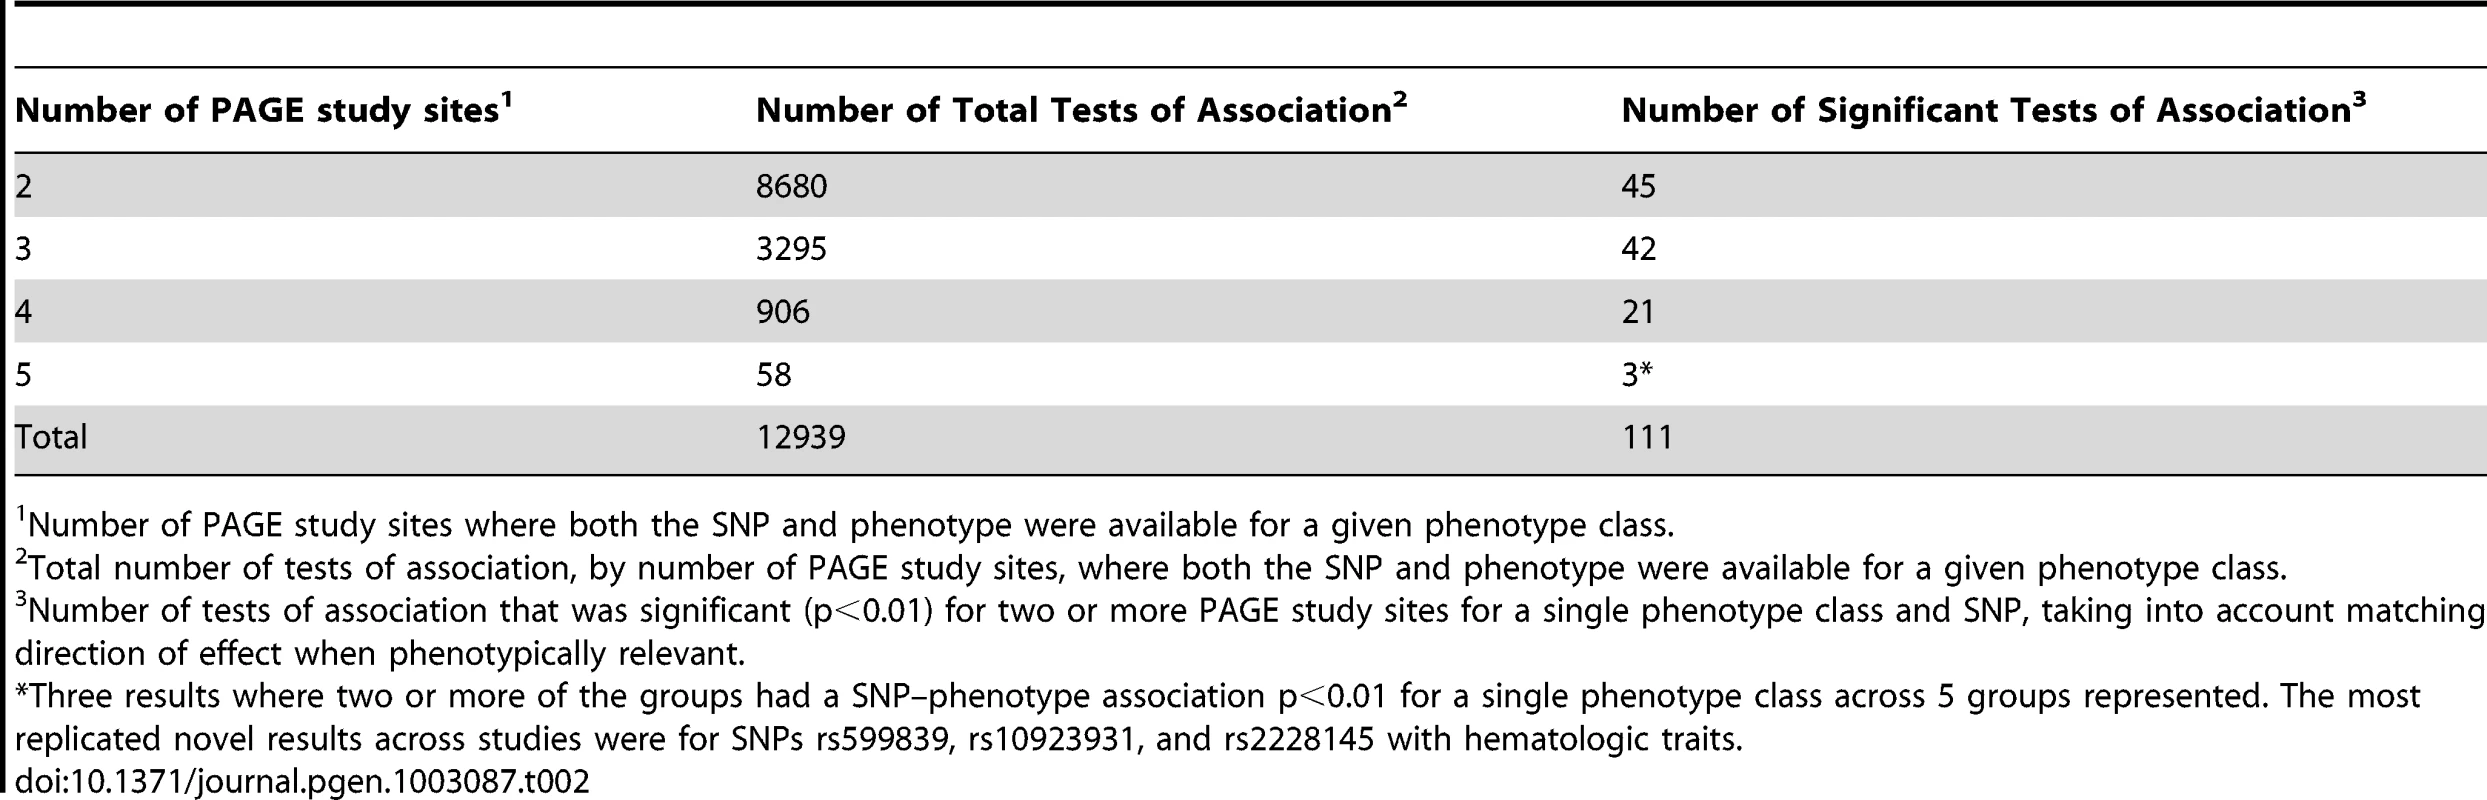 The number of SNP–Phenotype tests of association for phenotype-classes varies by PAGE study site genotype and phenotype overlap.